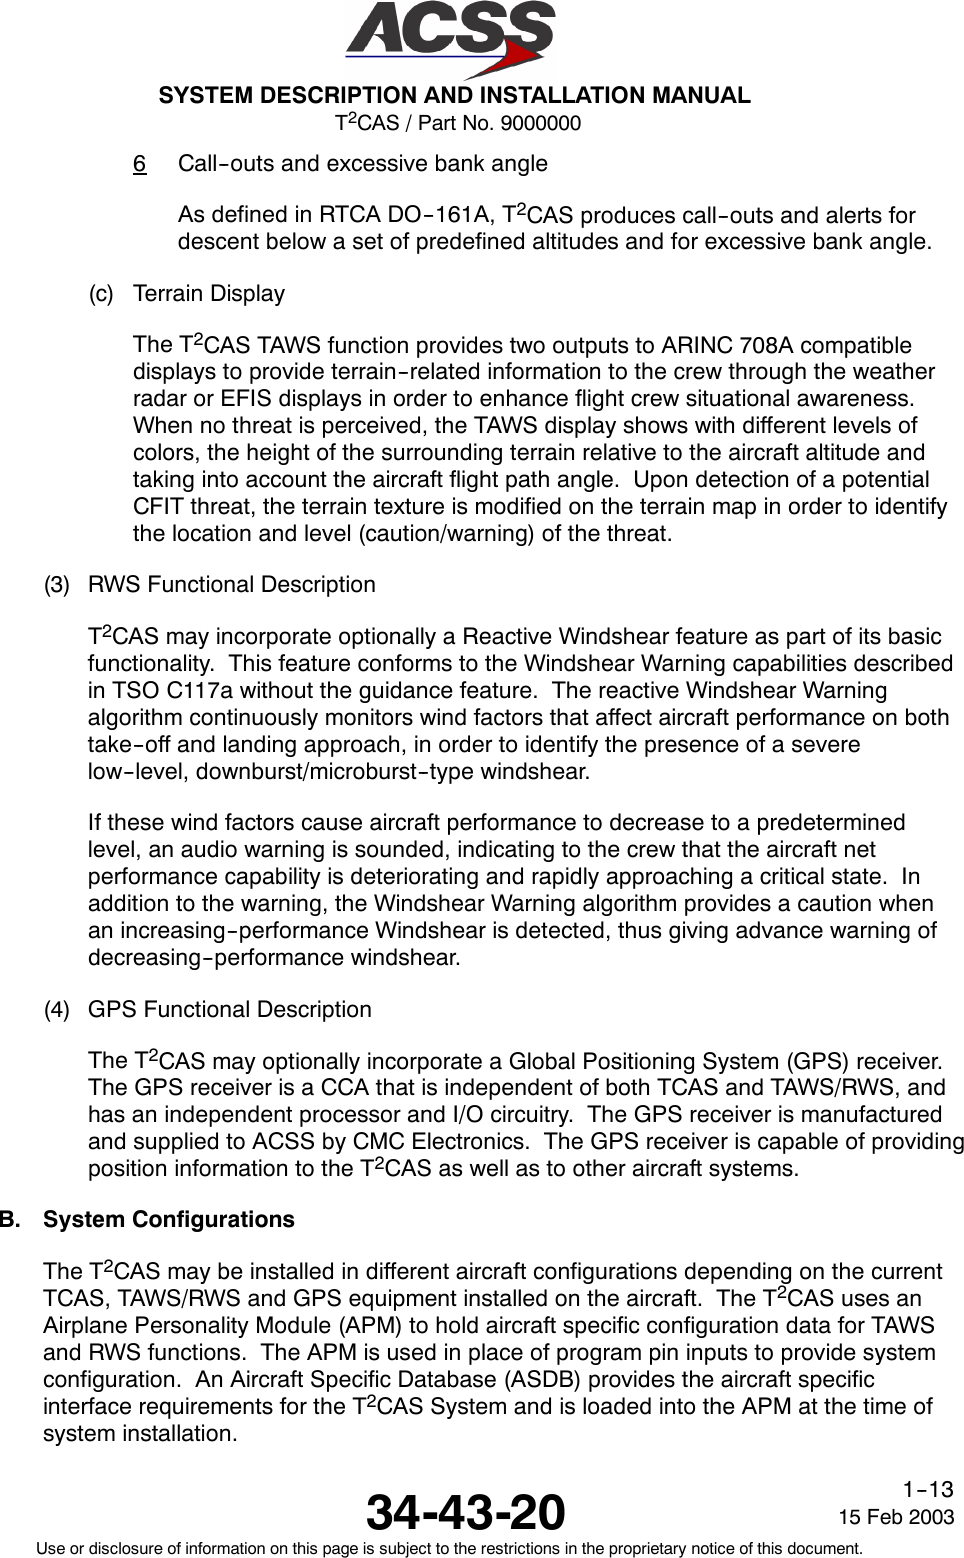 T2CAS / Part No. 9000000SYSTEM DESCRIPTION AND INSTALLATION MANUAL34-43-20 15 Feb 2003Use or disclosure of information on this page is subject to the restrictions in the proprietary notice of this document.1--136Call--outs and excessive bank angleAs defined in RTCA DO--161A, T2CAS produces call--outs and alerts fordescent below a set of predefined altitudes and for excessive bank angle.(c) Terrain DisplayThe T2CAS TAWS function provides two outputs to ARINC 708A compatibledisplays to provide terrain--related information to the crew through the weatherradar or EFIS displays in order to enhance flight crew situational awareness.When no threat is perceived, the TAWS display shows with different levels ofcolors, the height of the surrounding terrain relative to the aircraft altitude andtaking into account the aircraft flight path angle. Upon detection of a potentialCFIT threat, the terrain texture is modified on the terrain map in order to identifythe location and level (caution/warning) of the threat.(3) RWS Functional DescriptionT2CAS may incorporate optionally a Reactive Windshear feature as part of its basicfunctionality. This feature conforms to the Windshear Warning capabilities describedin TSO C117a without the guidance feature. The reactive Windshear Warningalgorithm continuously monitors wind factors that affect aircraft performance on bothtake--off and landing approach, in order to identify the presence of a severelow--level, downburst/microburst--type windshear.If these wind factors cause aircraft performance to decrease to a predeterminedlevel, an audio warning is sounded, indicating to the crew that the aircraft netperformance capability is deteriorating and rapidly approaching a critical state. Inaddition to the warning, the Windshear Warning algorithm provides a caution whenan increasing--performance Windshear is detected, thus giving advance warning ofdecreasing--performance windshear.(4) GPS Functional DescriptionThe T2CAS may optionally incorporate a Global Positioning System (GPS) receiver.The GPS receiver is a CCA that is independent of both TCAS and TAWS/RWS, andhas an independent processor and I/O circuitry. The GPS receiver is manufacturedand supplied to ACSS by CMC Electronics. The GPS receiver is capable of providingposition information to the T2CAS as well as to other aircraft systems.B. System ConfigurationsThe T2CAS may be installed in different aircraft configurations depending on the currentTCAS, TAWS/RWS and GPS equipment installed on the aircraft. The T2CAS uses anAirplane Personality Module (APM) to hold aircraft specific configuration data for TAWSand RWS functions. The APM is used in place of program pin inputs to provide systemconfiguration. An Aircraft Specific Database (ASDB) provides the aircraft specificinterface requirements for the T2CAS System and is loaded into the APM at the time ofsystem installation.